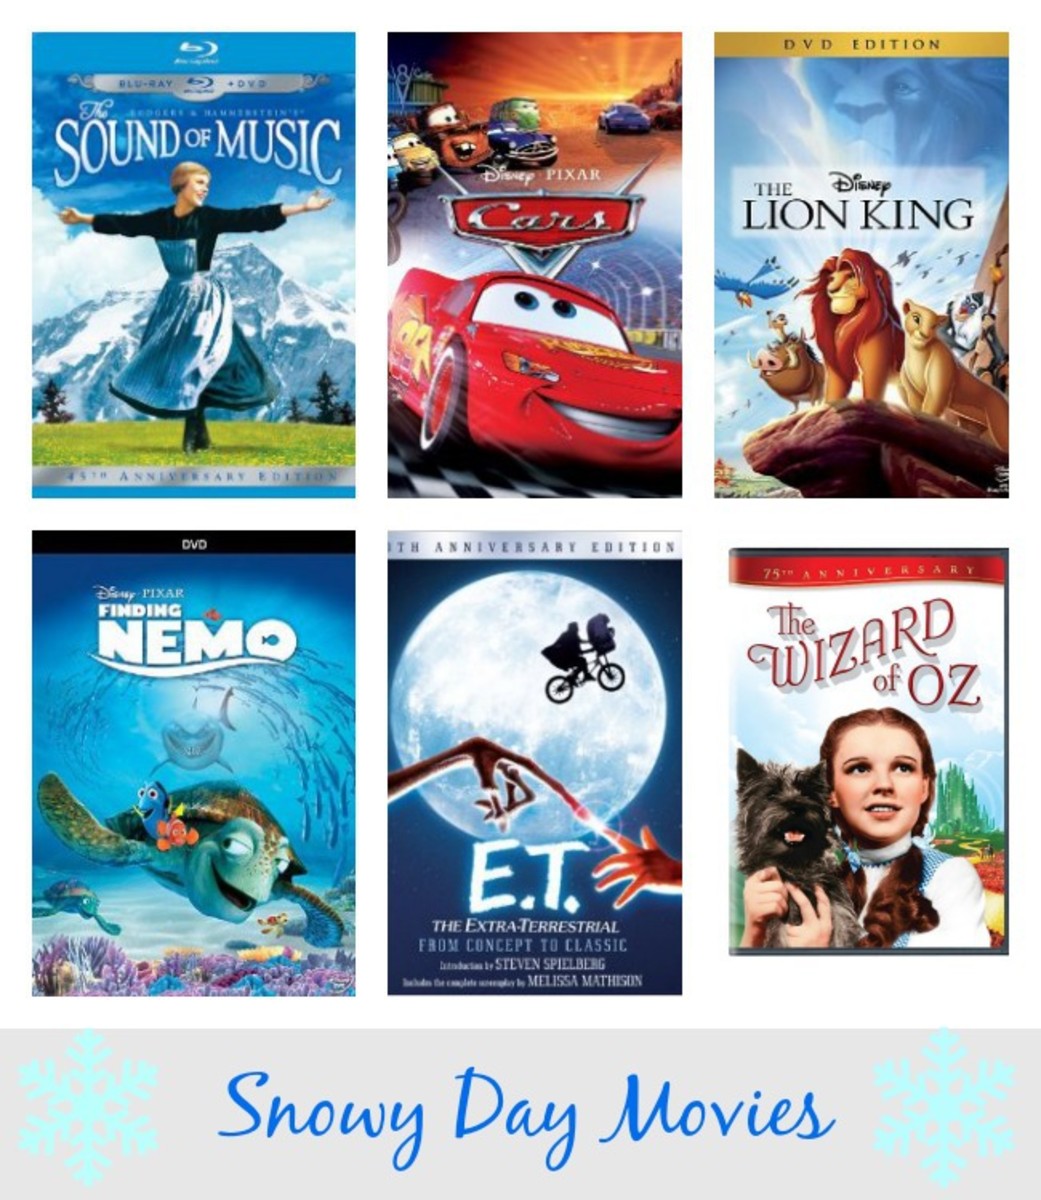 Snowy Day Movies